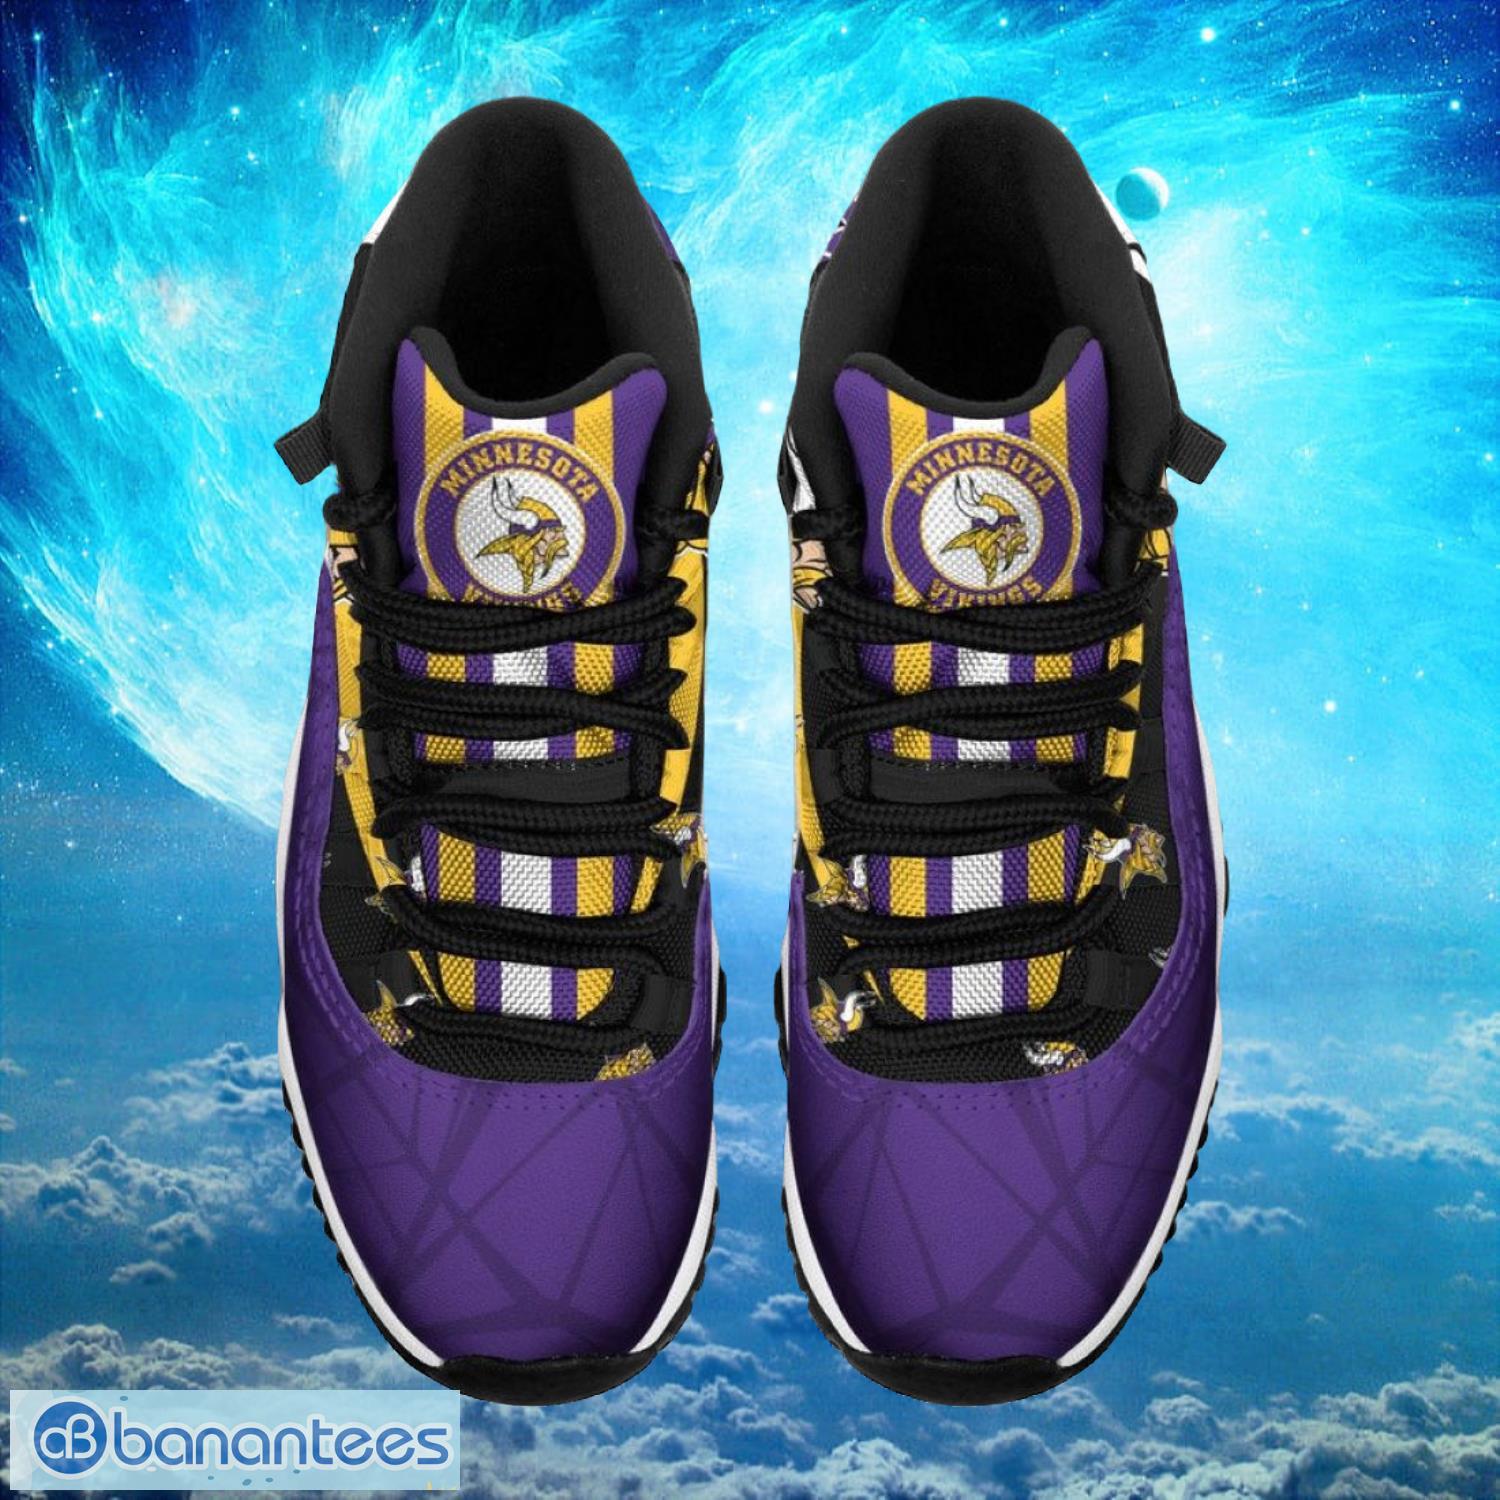 Minnesota Vikings NFL Air Jordan 11 Sneakers Shoes Gift For Fans Product Photo 2